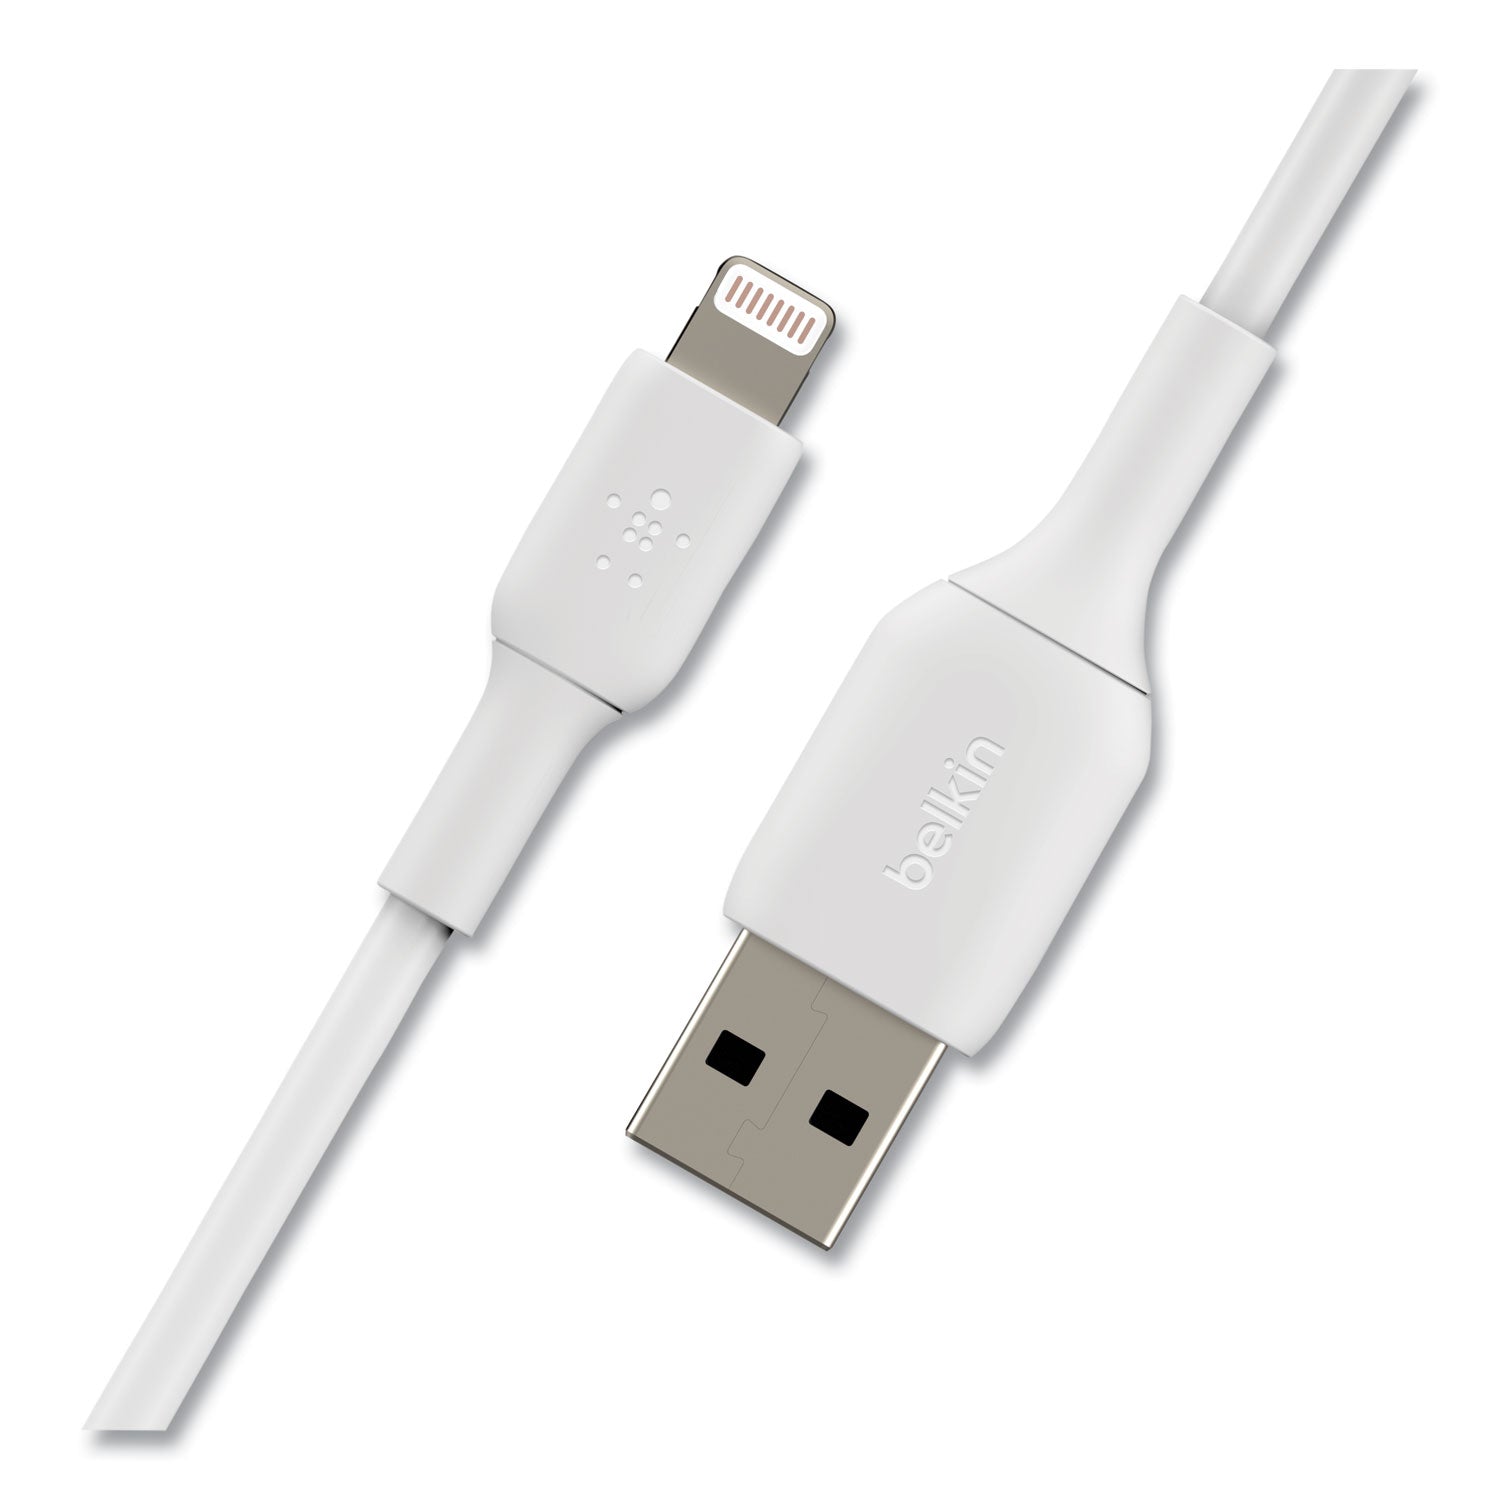 boost-charge-apple-lightning-to-usb-a-chargesync-cable-98-ft-white_blkcaa001bt3mwh - 2